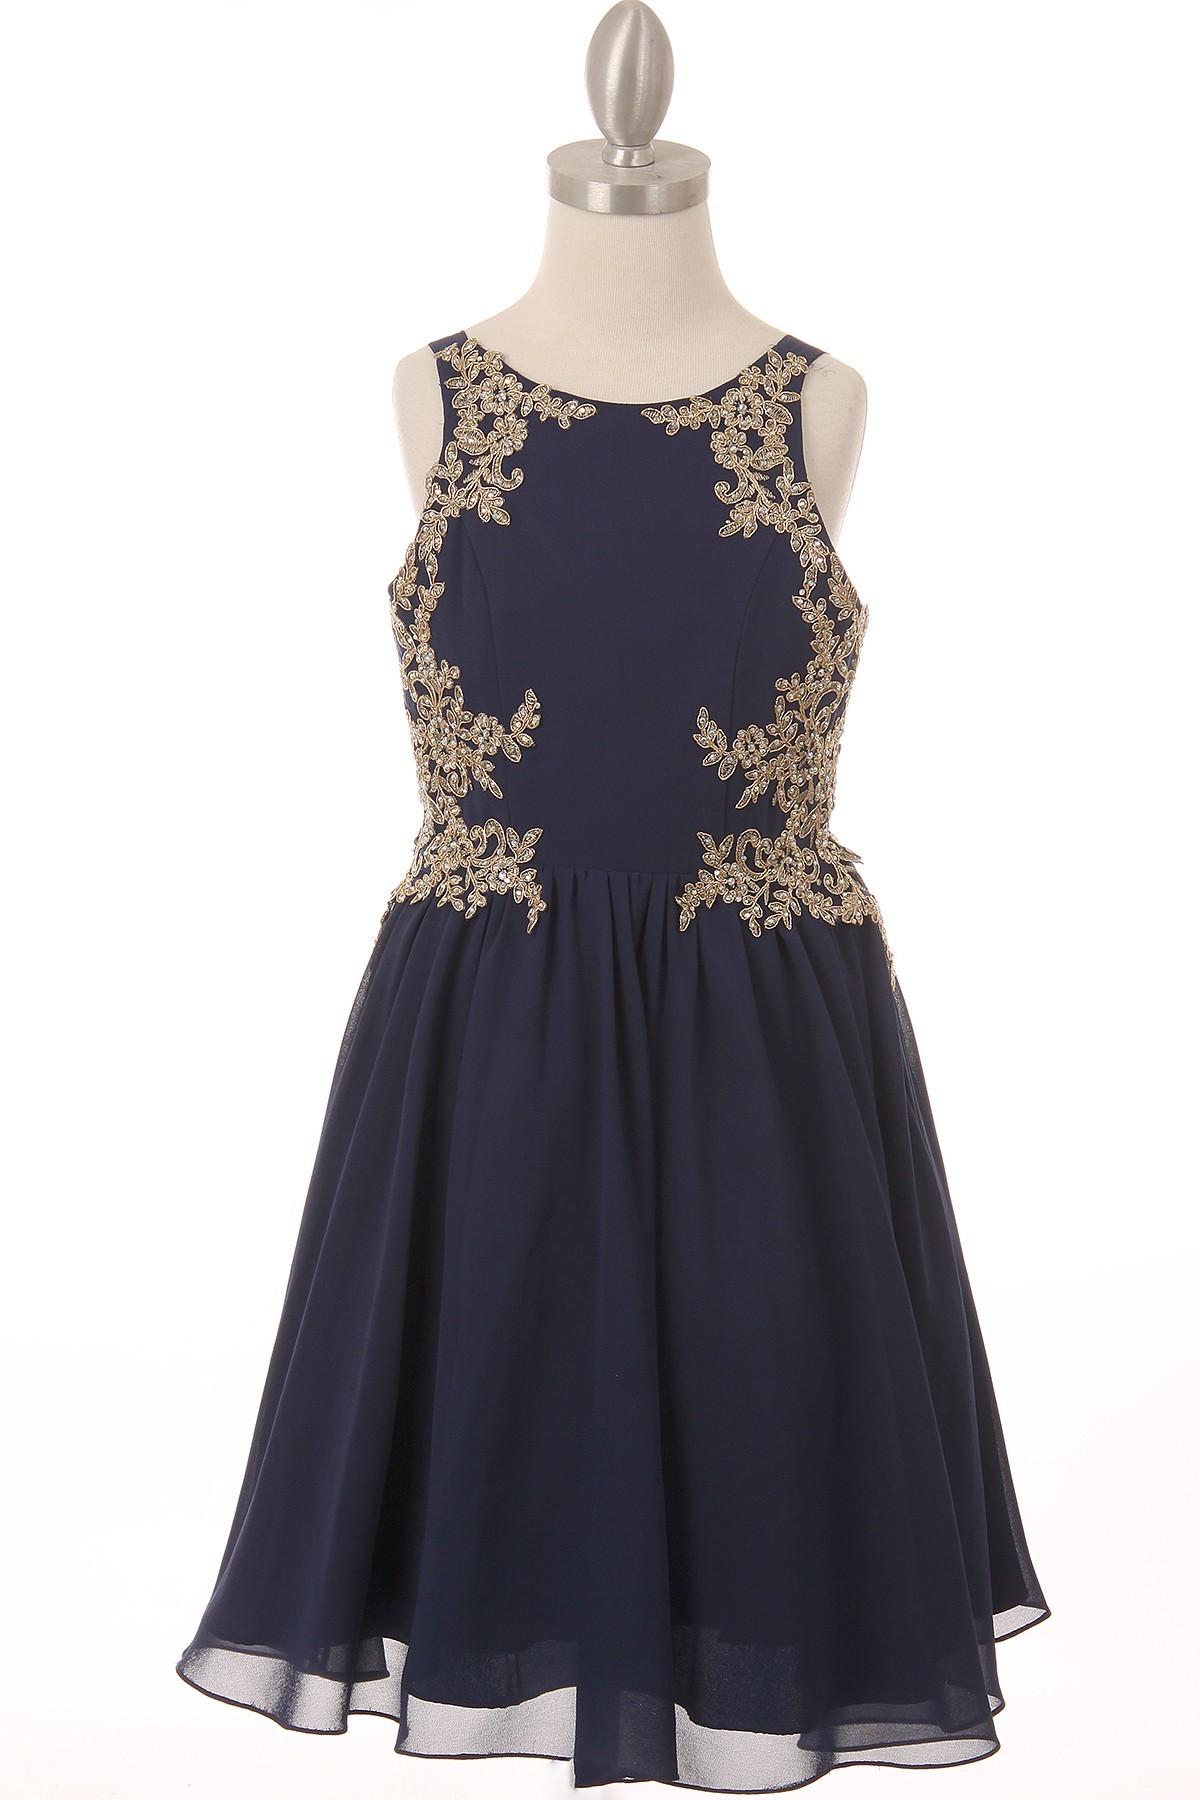 girls navy blue dress with gold lace